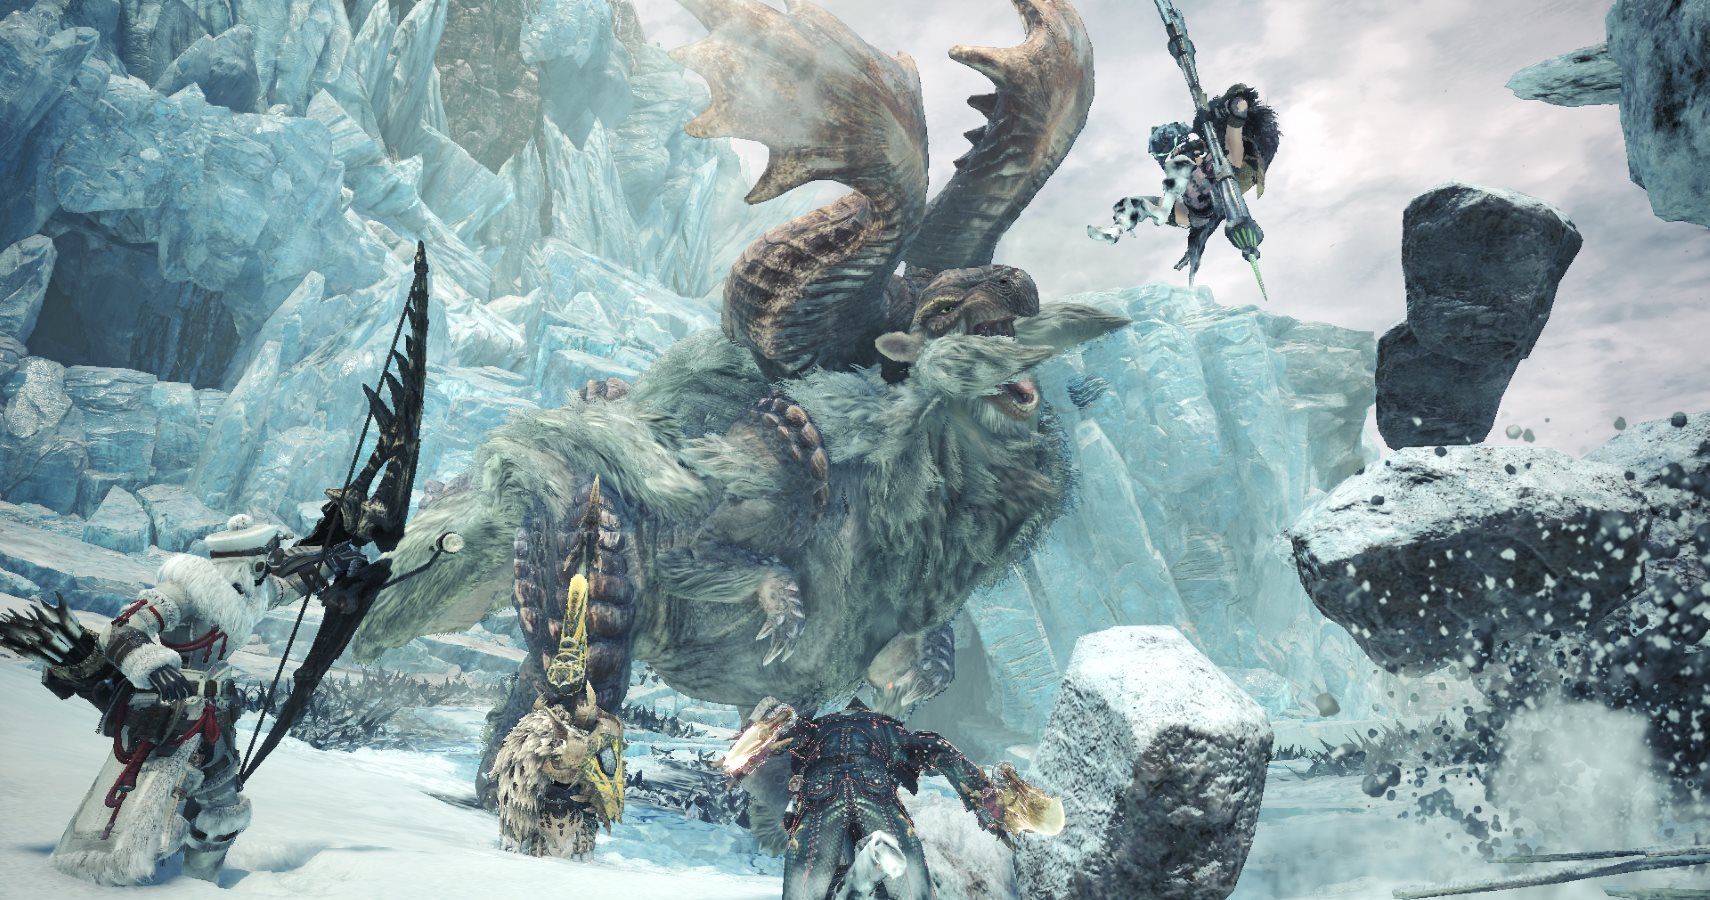 Nearly Half Of Monster Hunter: World's Iceborne DLC Takes Place In Areas From The Base Game